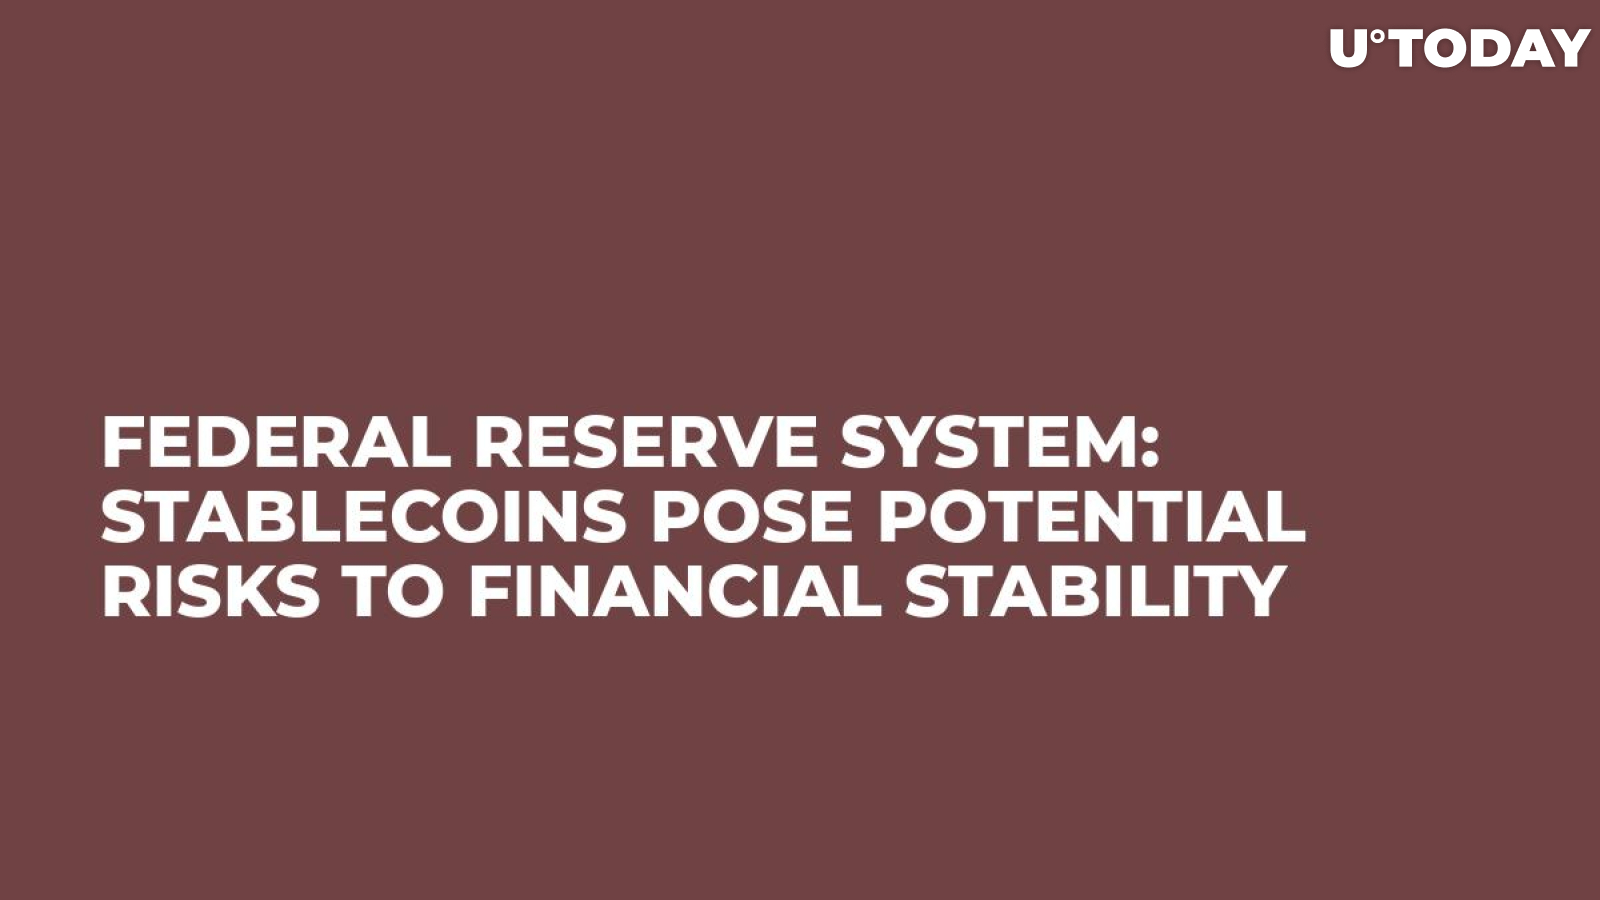 Federal Reserve System: Stablecoins Pose Potential Risks to Financial Stability